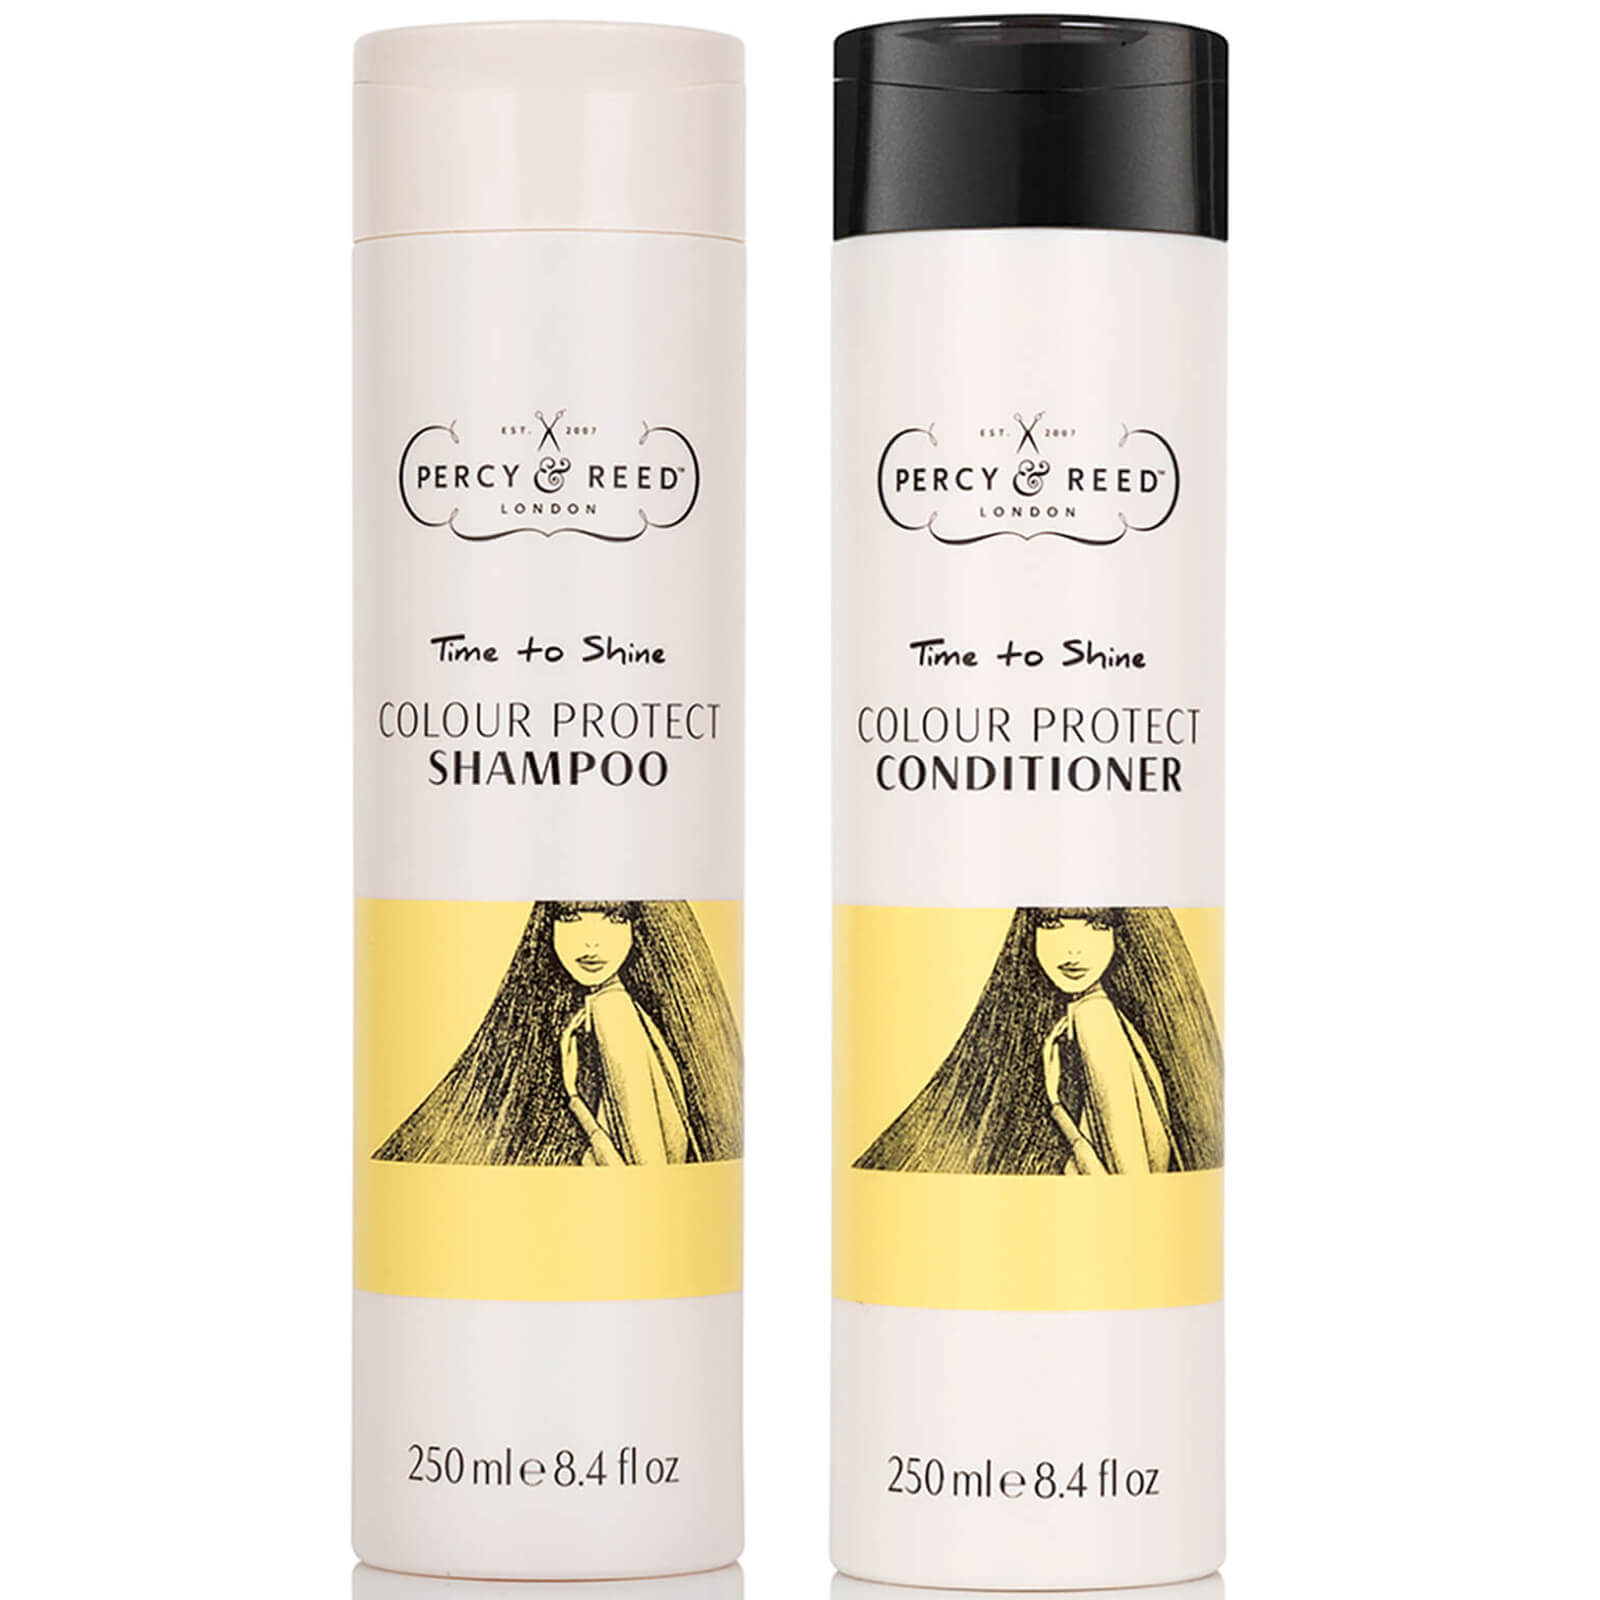 Percy & Reed Time to Shine Colour Protect Shampoo and Conditioner